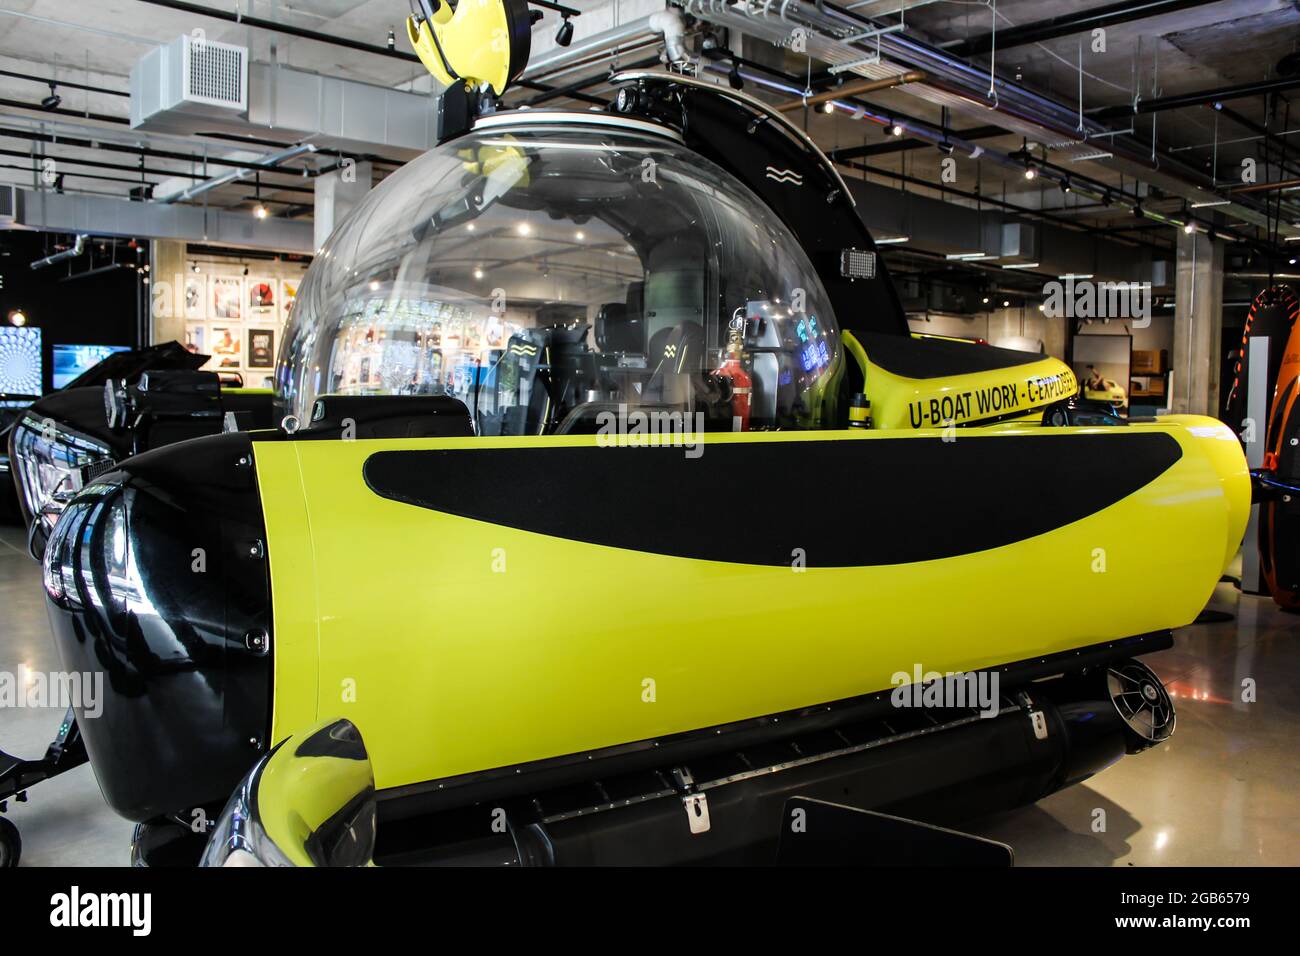 The U-Boat Worx C-Explorer 3 Submersible submarine displayed at The Arsenale in the Miami Design District Stock Photo